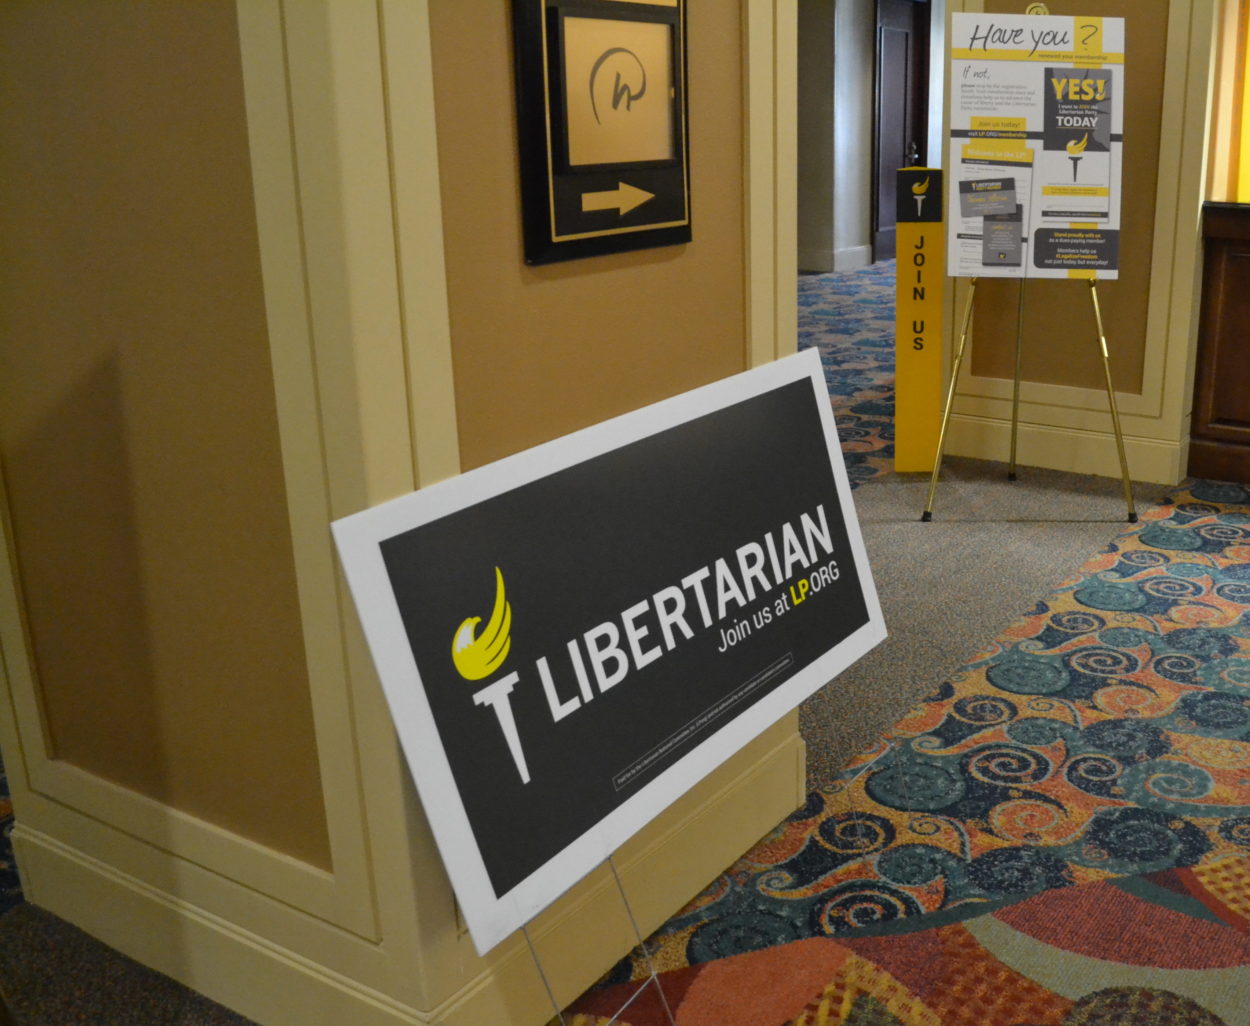 Libertarians one step closer to major party status in NM